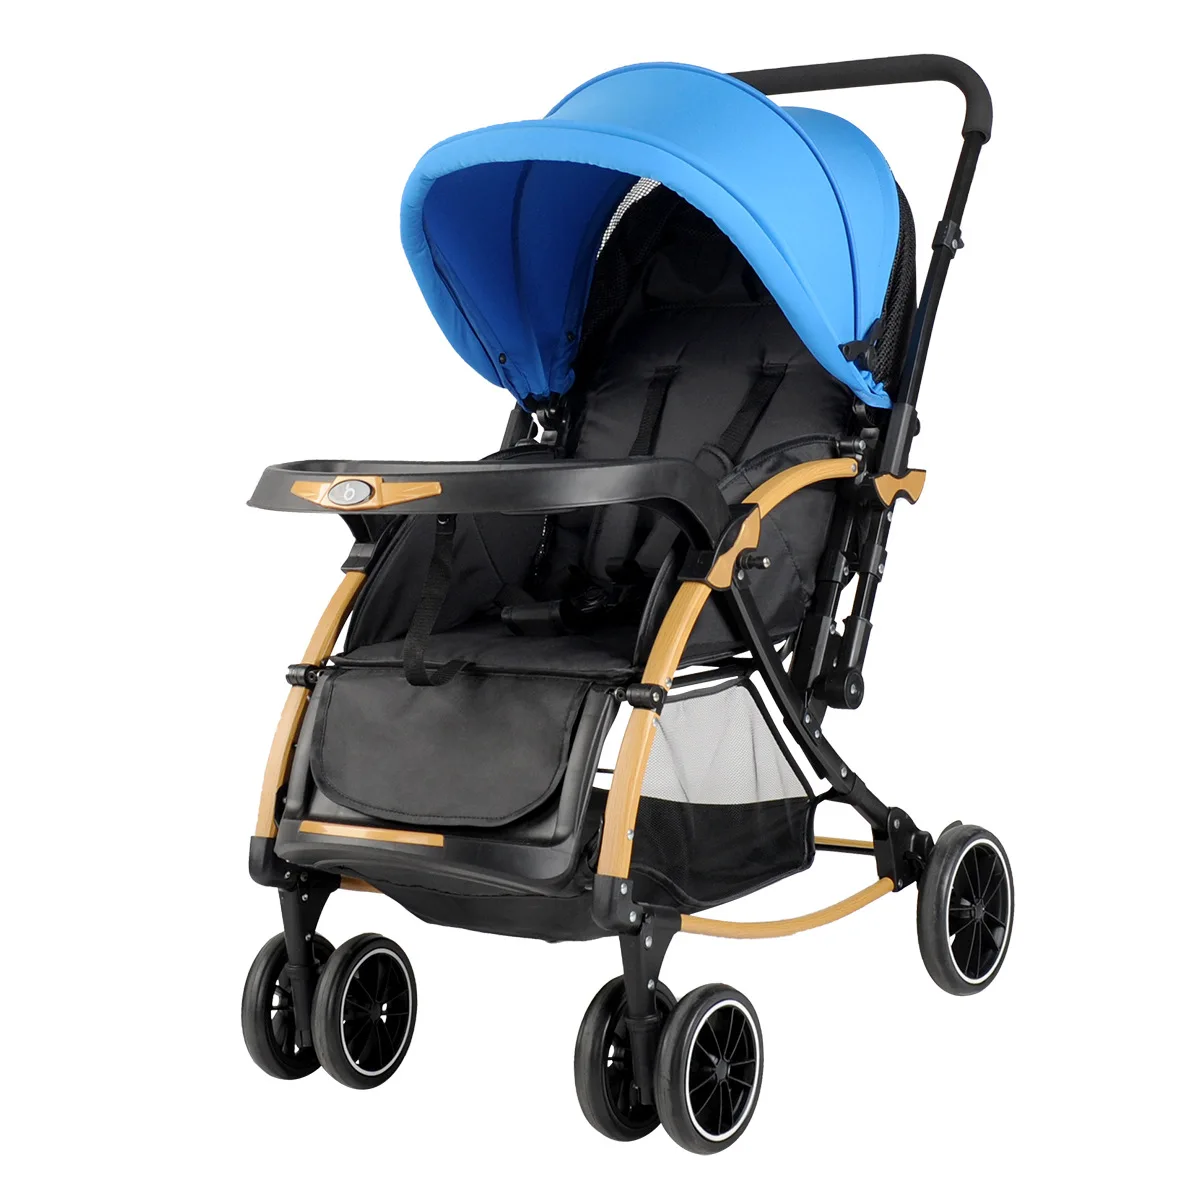 Baby Good Baby Stroller C3 Can Be Rocked, Can Sit and Lie Lightly Foldable Baby Four-wheeled Children's Stroller